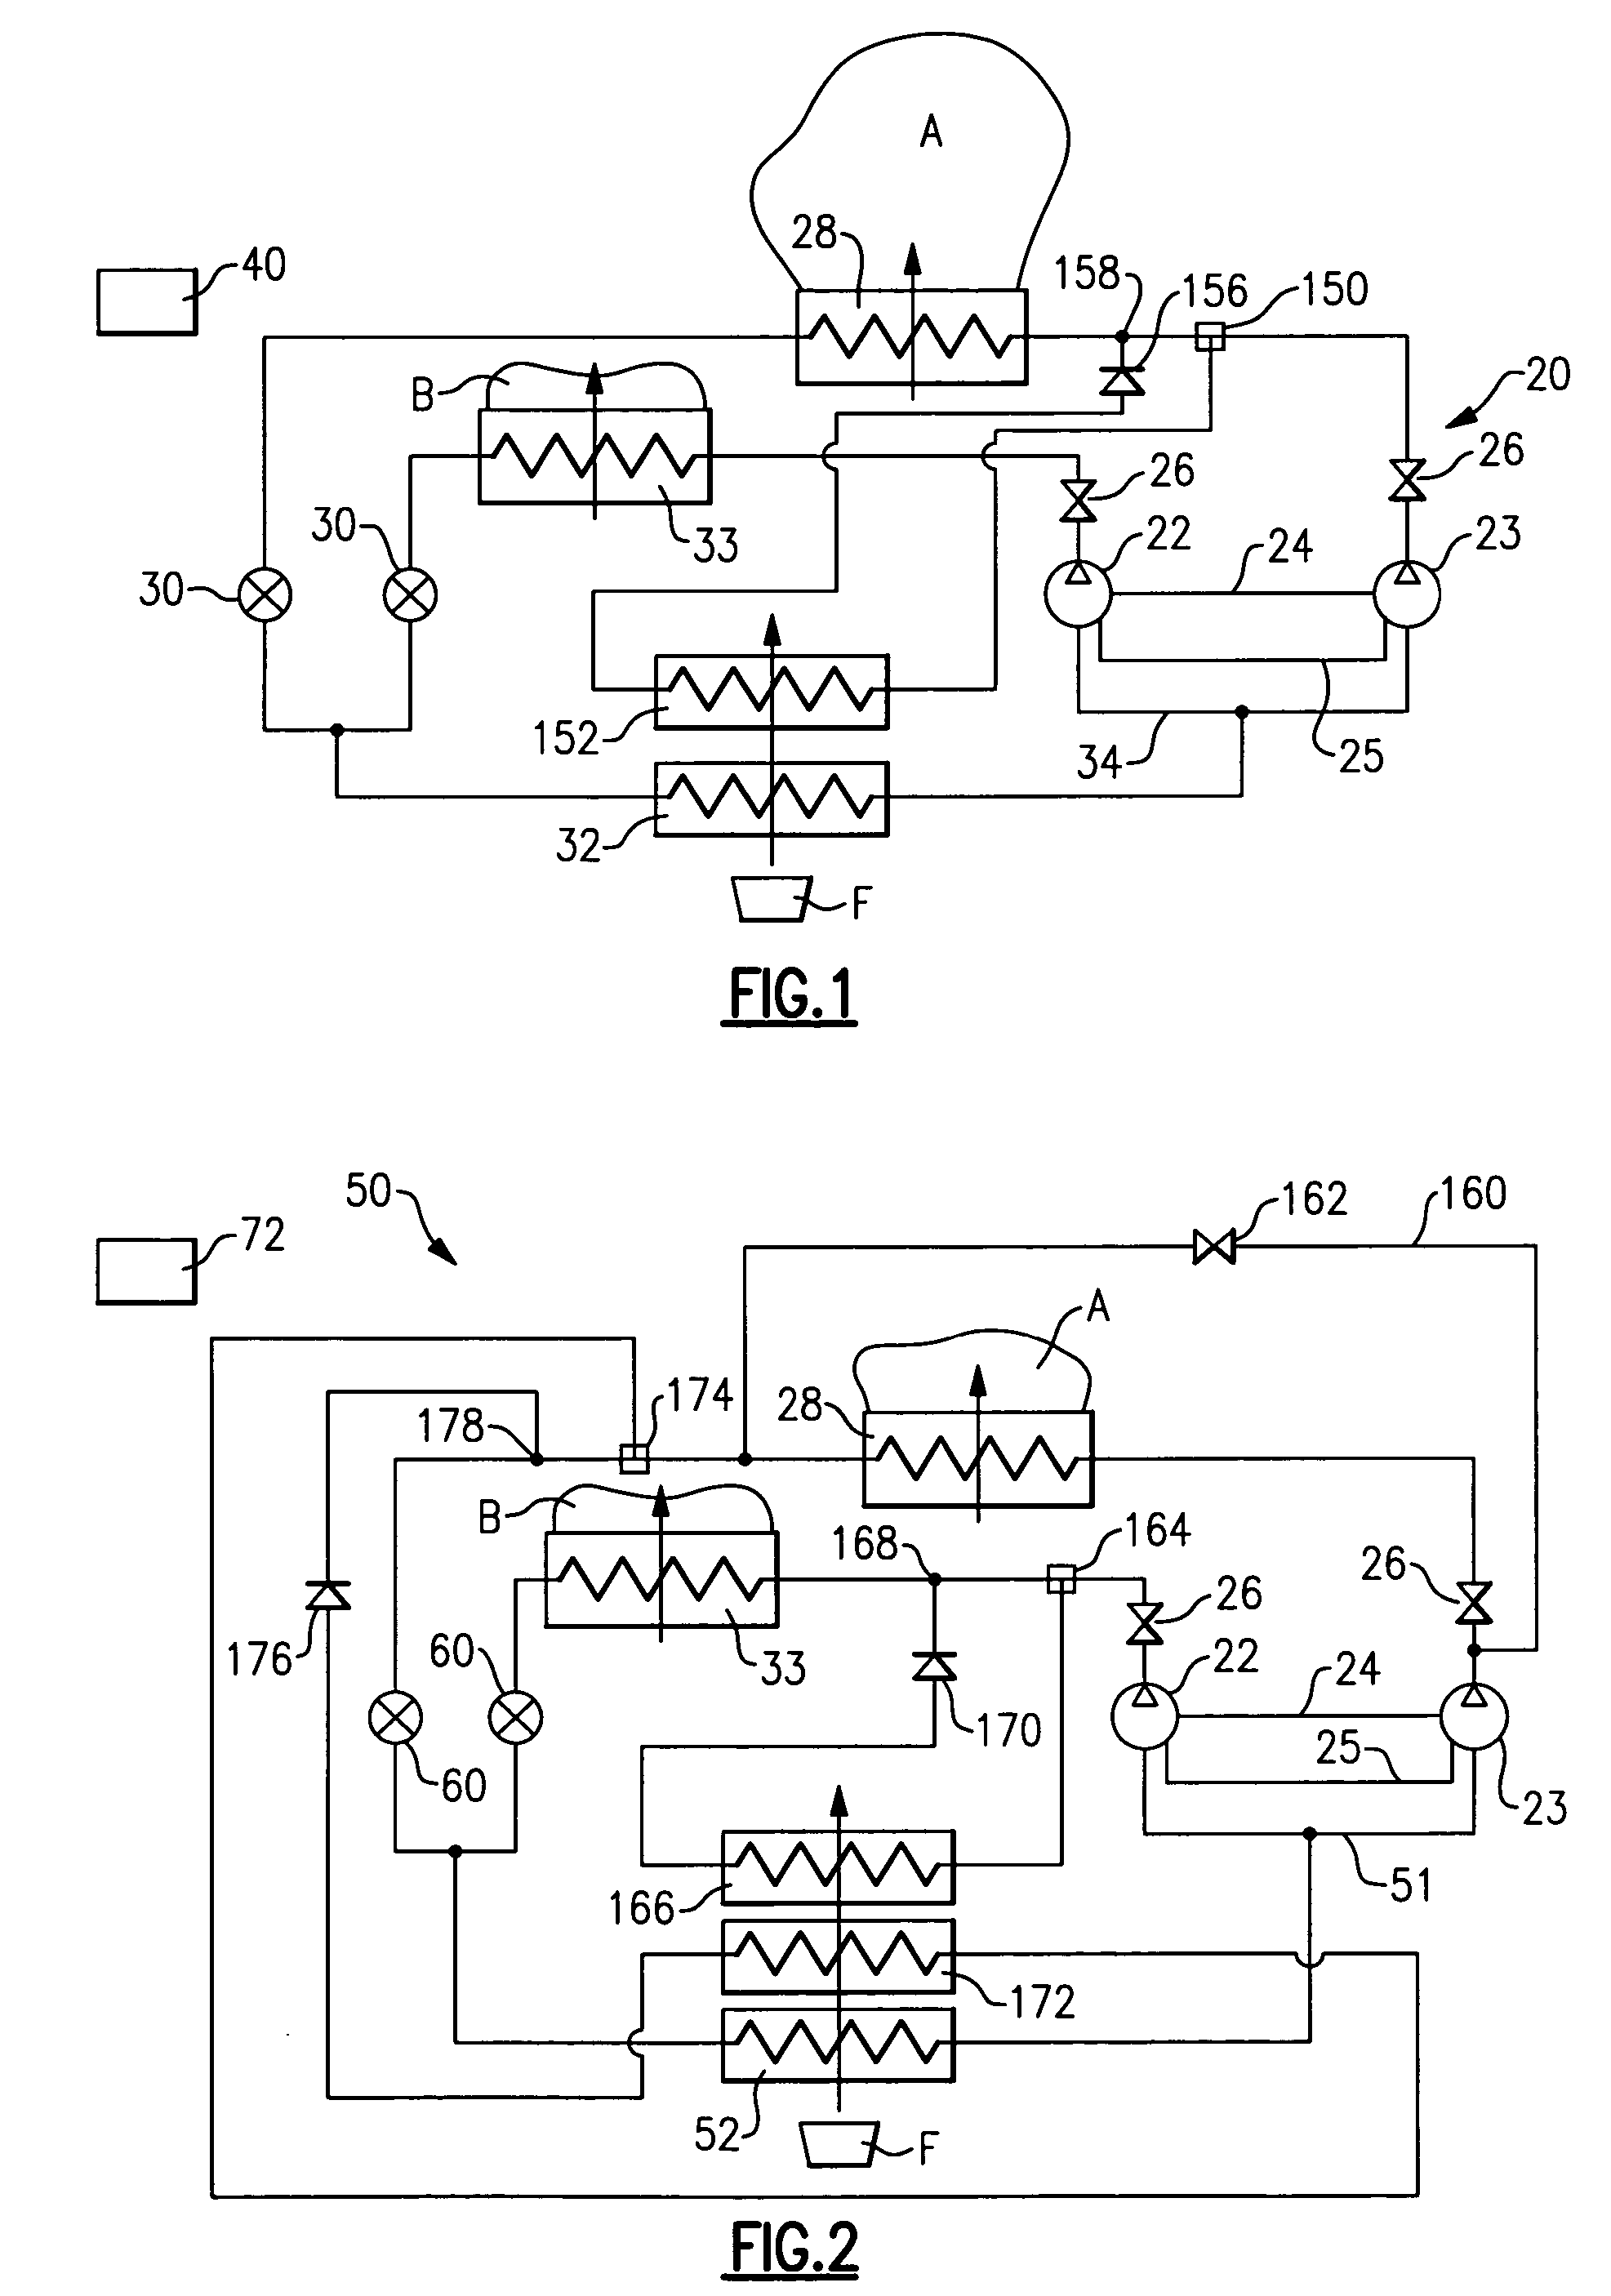 Multiple condenser reheat system with tandem compressors